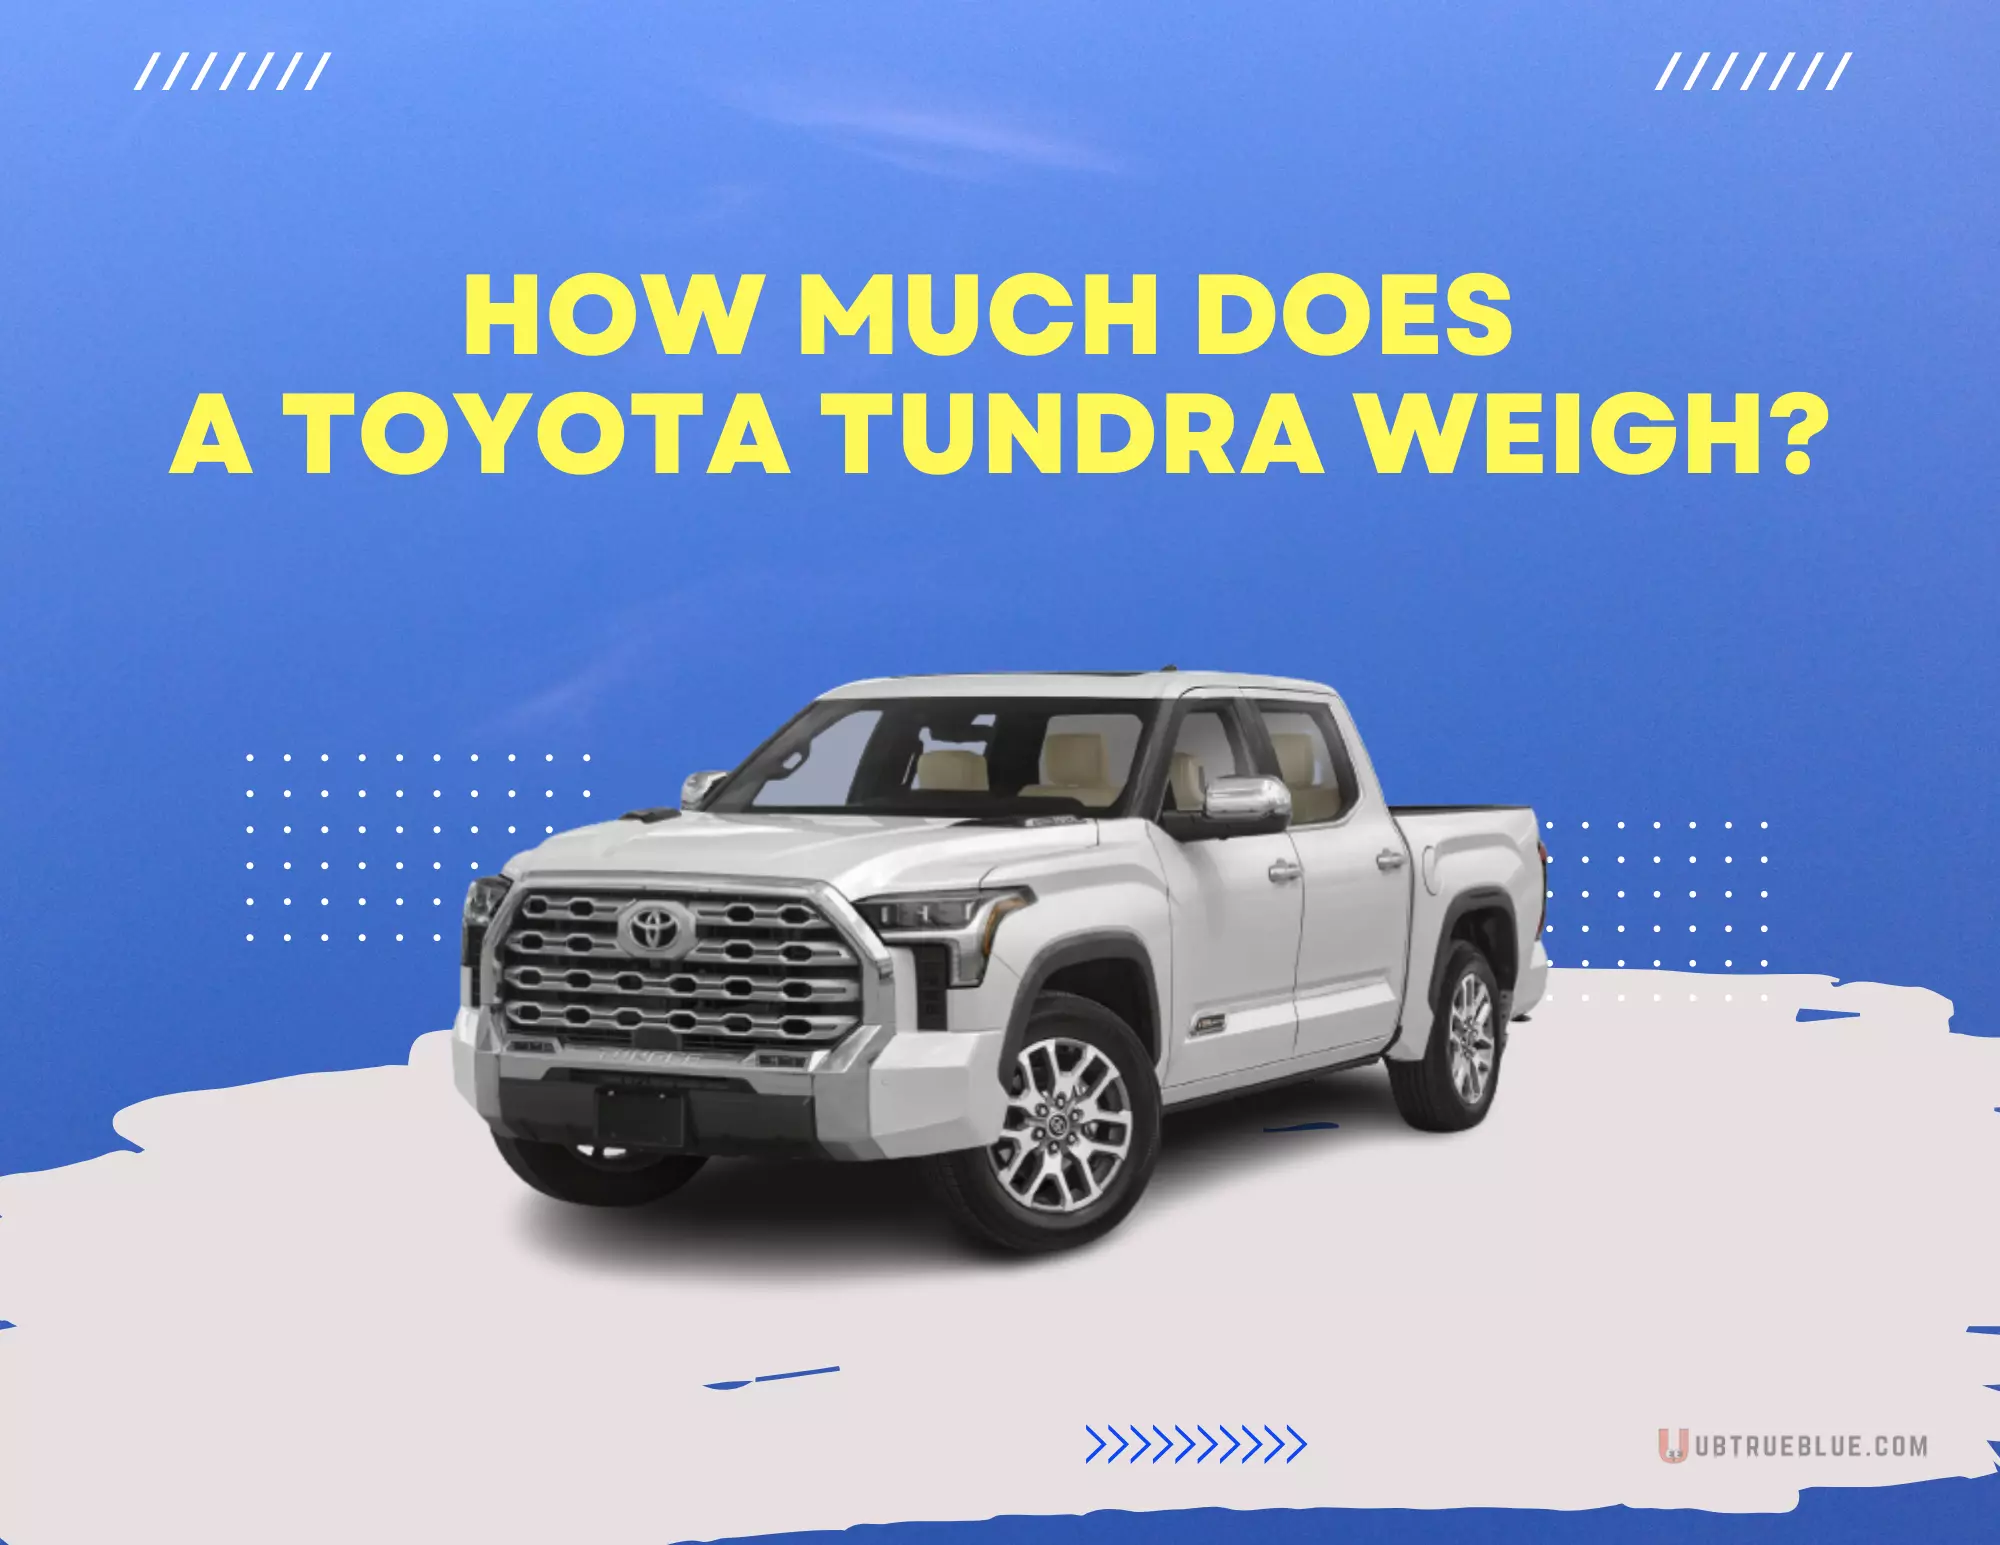 How Much Does A Toyota Tundra Weigh On Ubtrueblue Automotive Weigh? Everything You Need To Know Weight Capacity Car Specifications Models Truck  Full